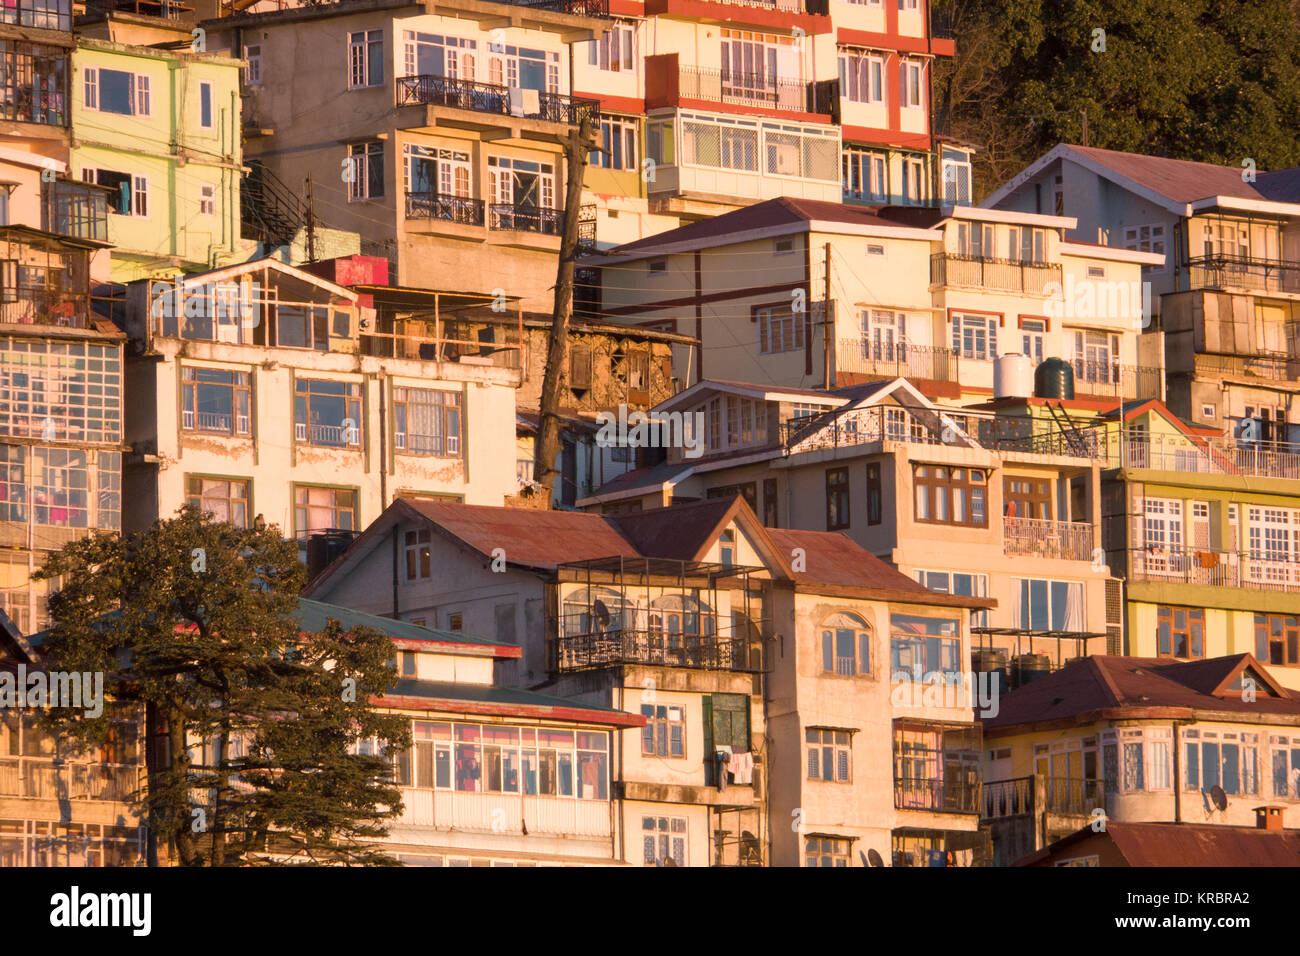 Tiered houses on steep mountainside in Shimla, India Stock Photo